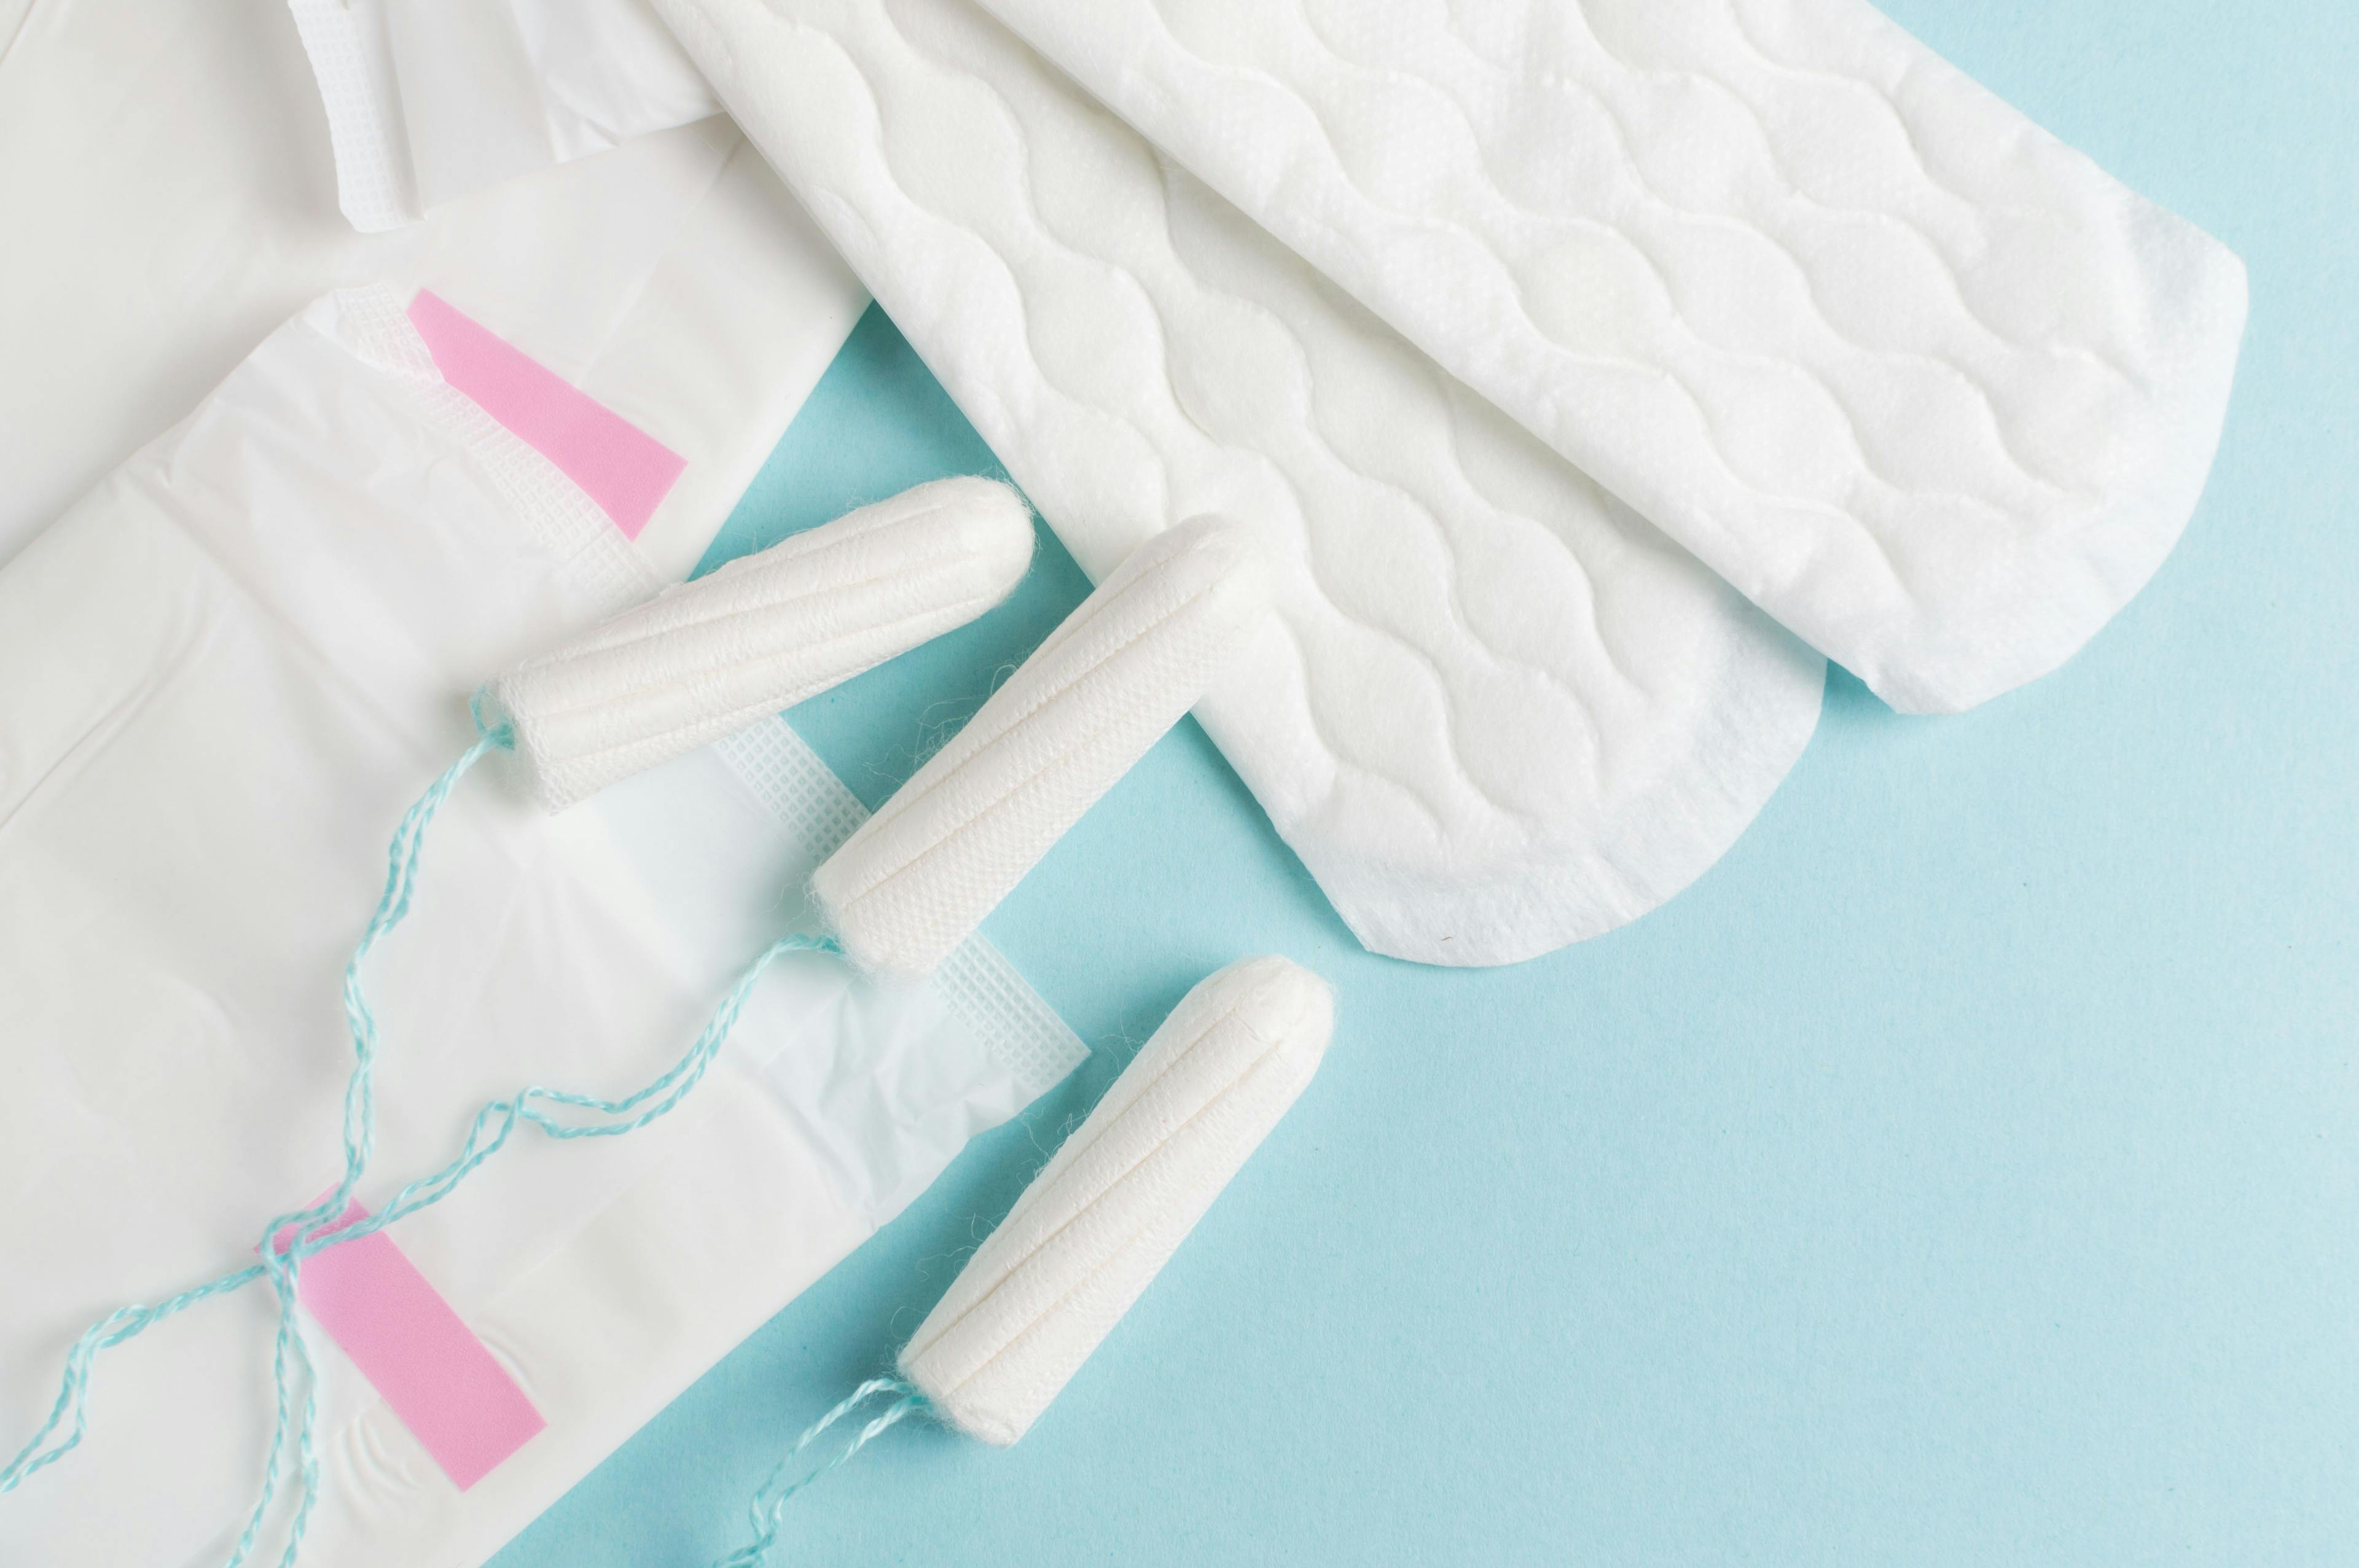 Closing the menstrual hygiene gap for low-income women